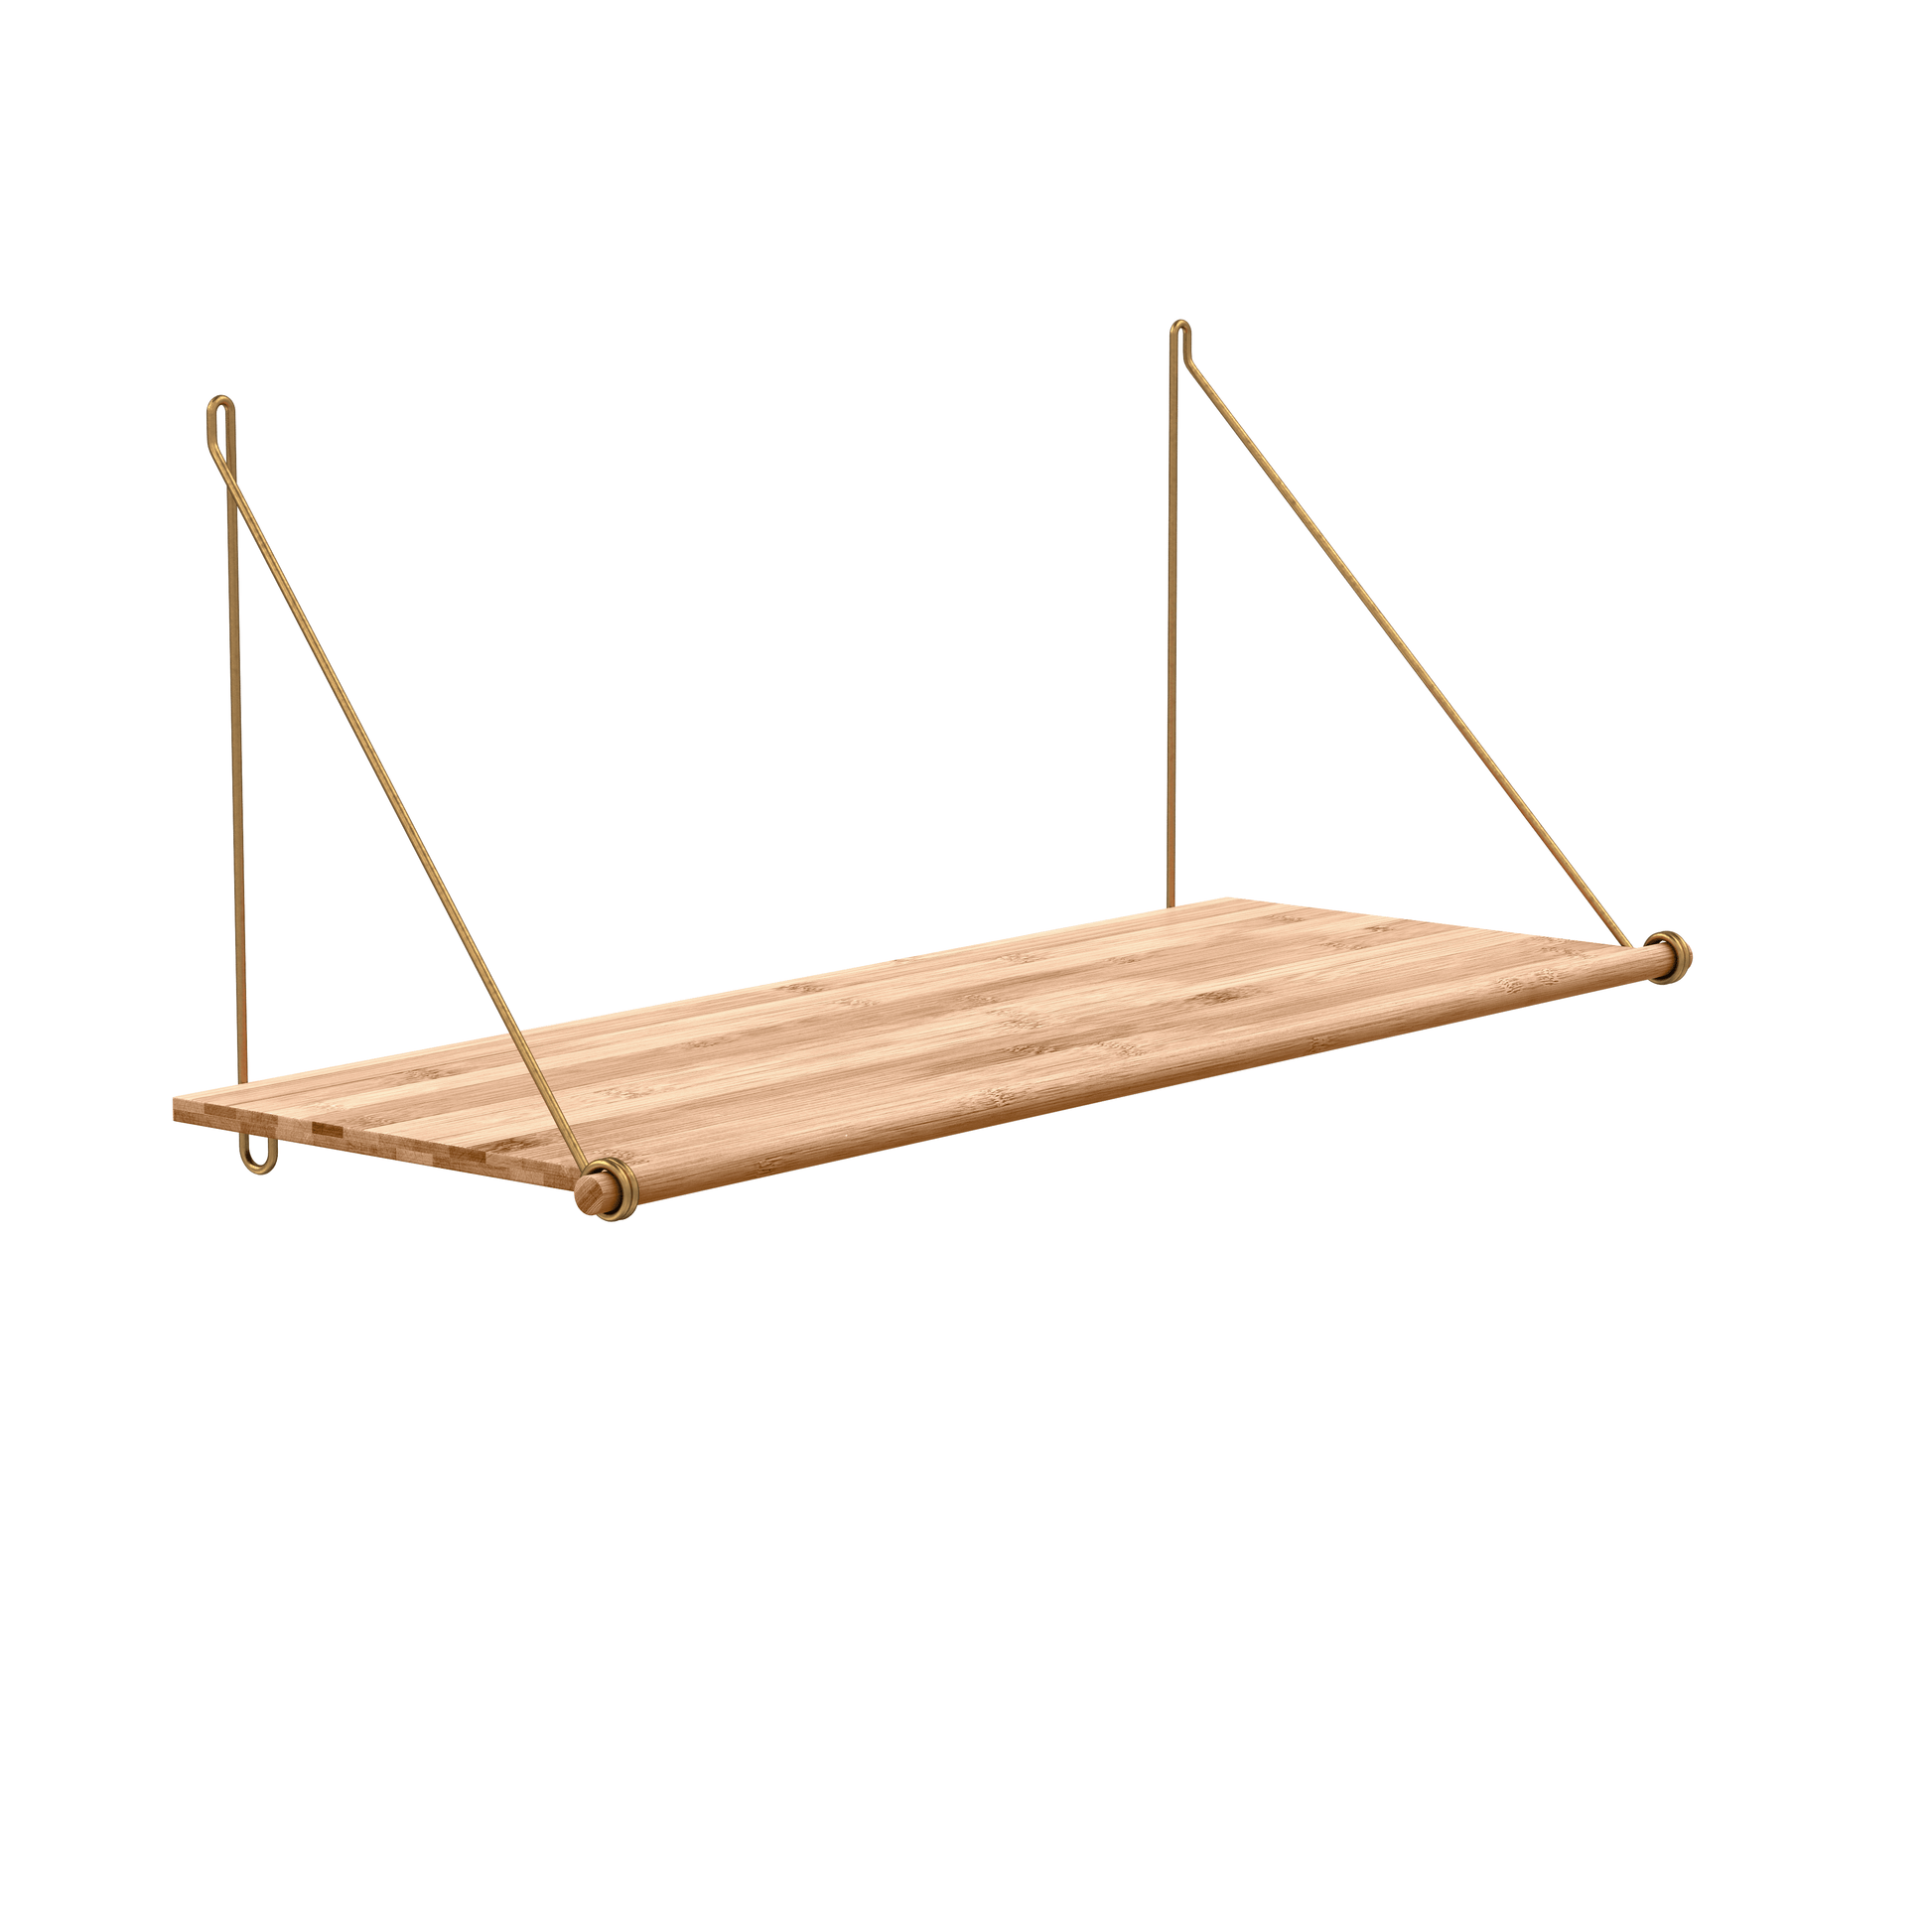 Loop Shelf natural Bamboo, with brass brackets, bamboo shelves with metal brackets, Scandinavian Design by We Do Wood; Sustainable and circular design, available at Nave Shop - online concept store